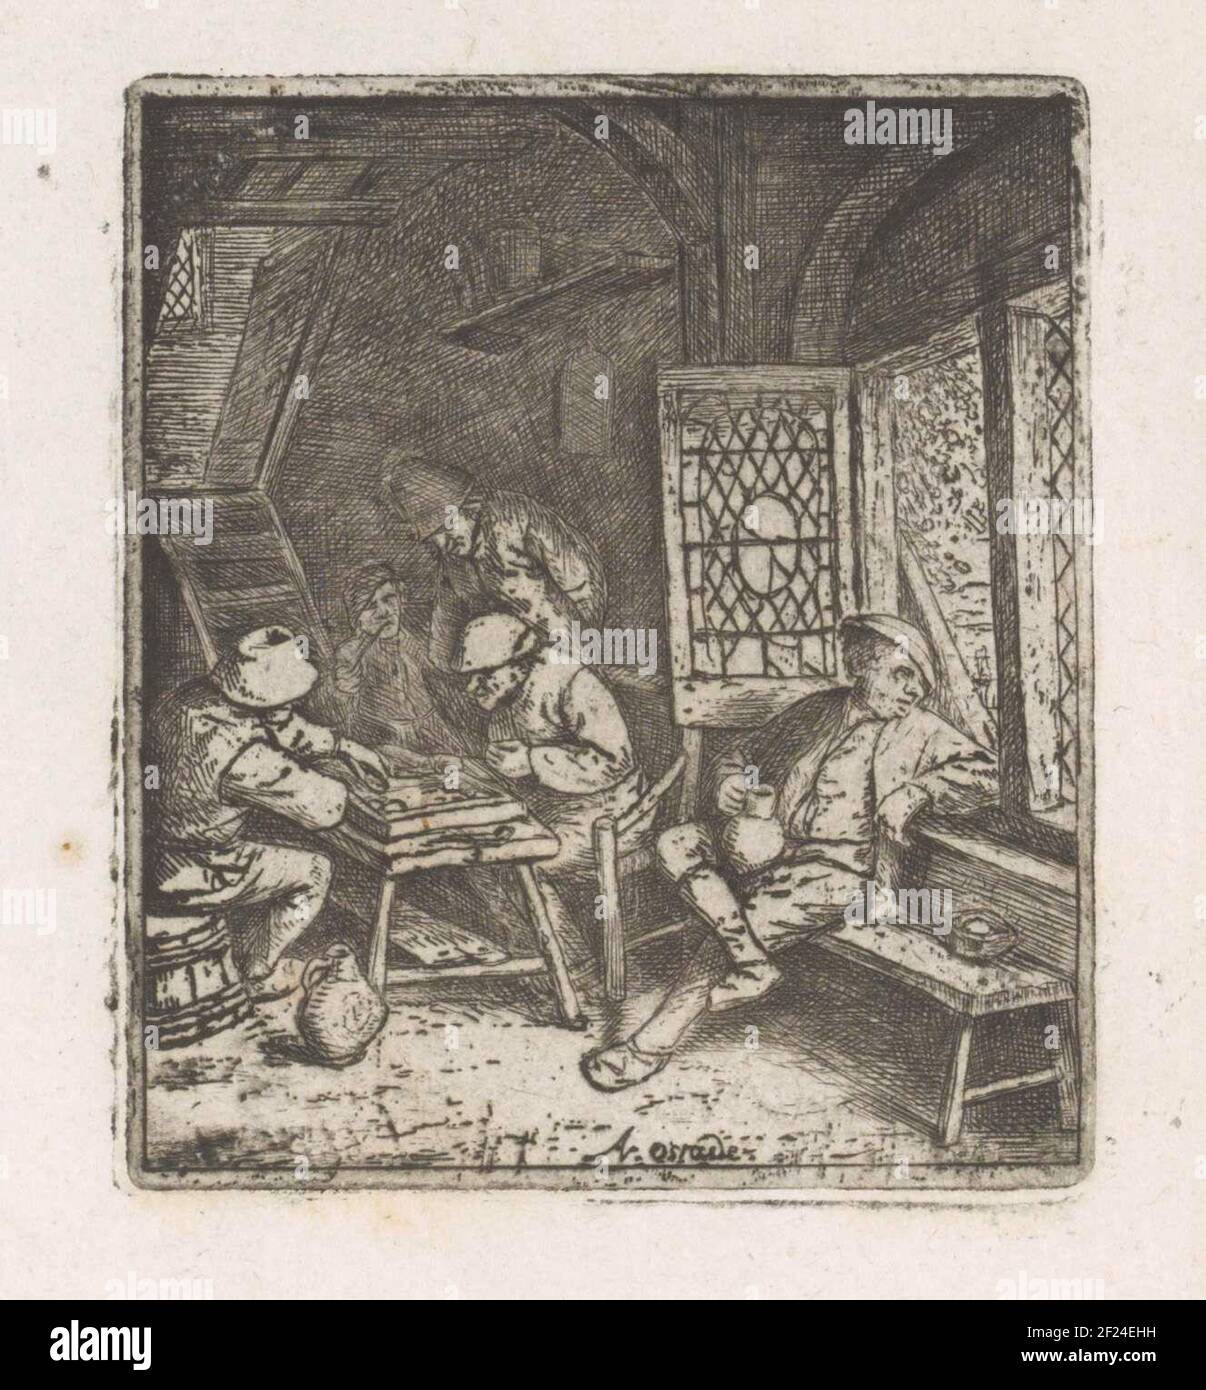 Boereninterieur met tric-trac spelers.At a table, possibly in an inn, two men playing tric-trac (backgammon) and a man with pipe. There is a man with a jug at the open window. This print is part of an album. Stock Photo